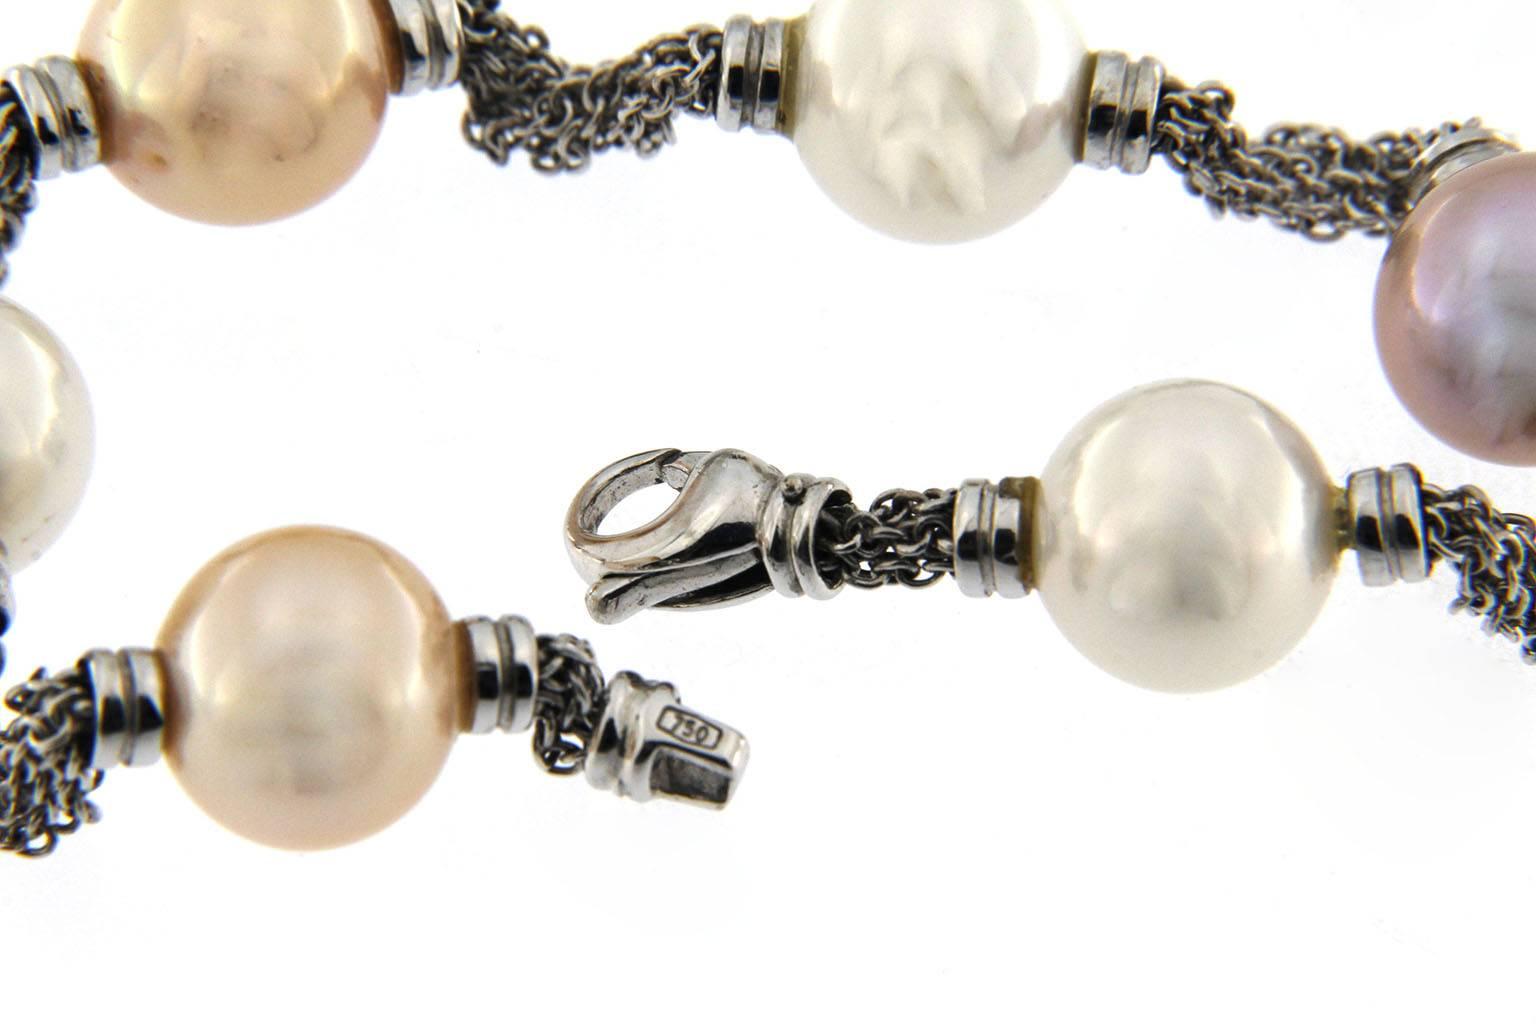 Jona design collection, hand crafted in Italy, 18 karat white gold chain bracelet, alternating white and pink Japanese cultured pearls.
All Jona jewelry is new and has never been previously owned or worn. Each item will arrive at your door